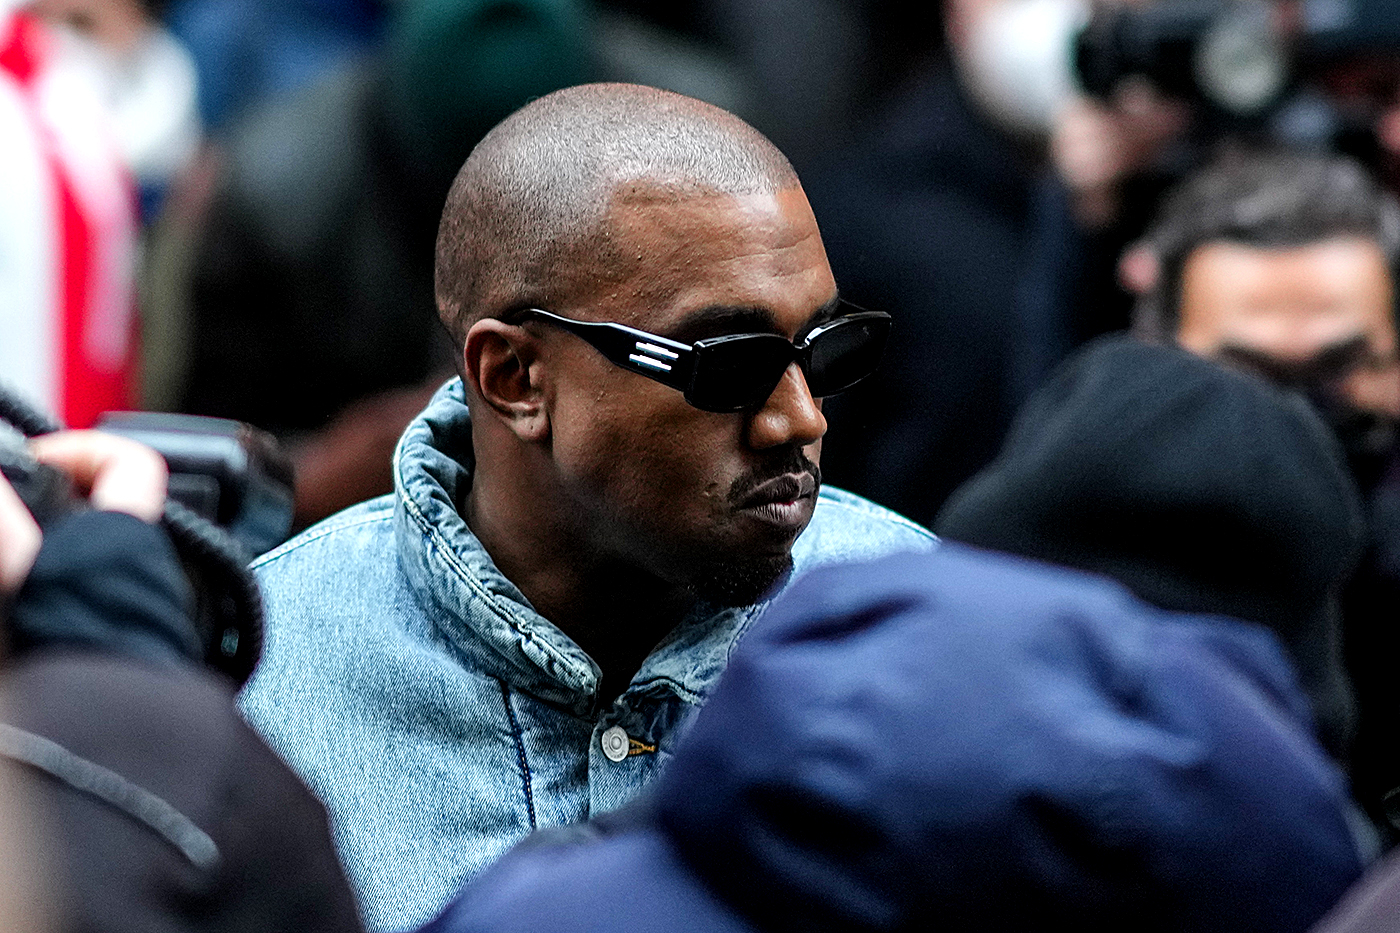 Yeezy Day 2022: Kanye West has spoken and he doesn't give it his